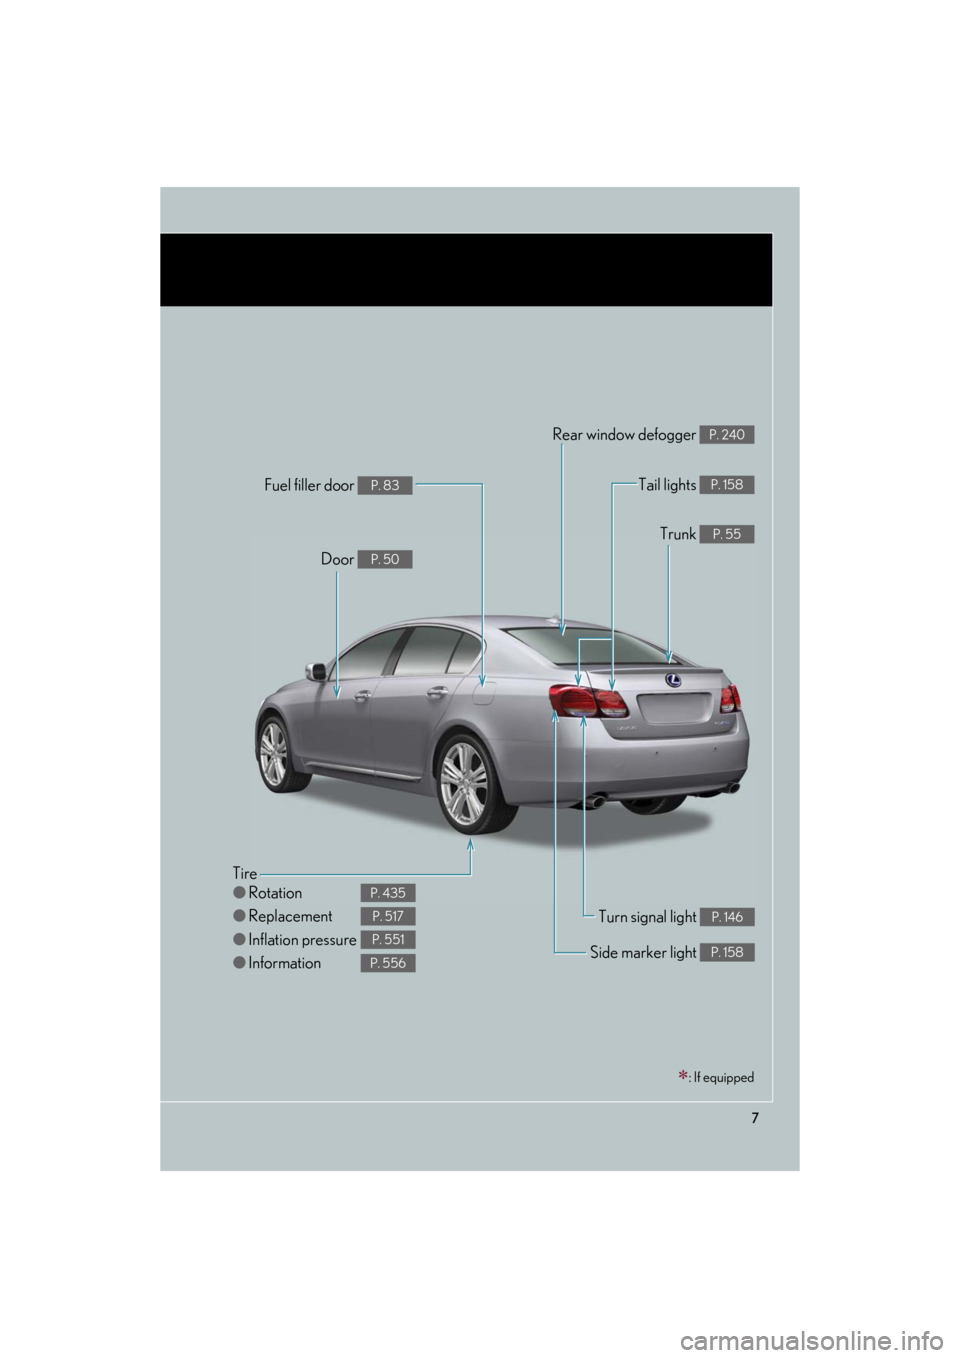 Lexus GS450h 2008  Do-it-yourself maintenance / LEXUS 2008 GS450H OWNERS MANUAL (OM30A96U) 7
GS_HV_U
December 12, 2007 3:50 pm
Tire
●Rotation
● Replacement
● Inflation pressure
● Information
P. 435
P. 517
P. 551
P. 556
Tail lights P. 158
Side marker light P. 158
Trunk P. 55
Rear win